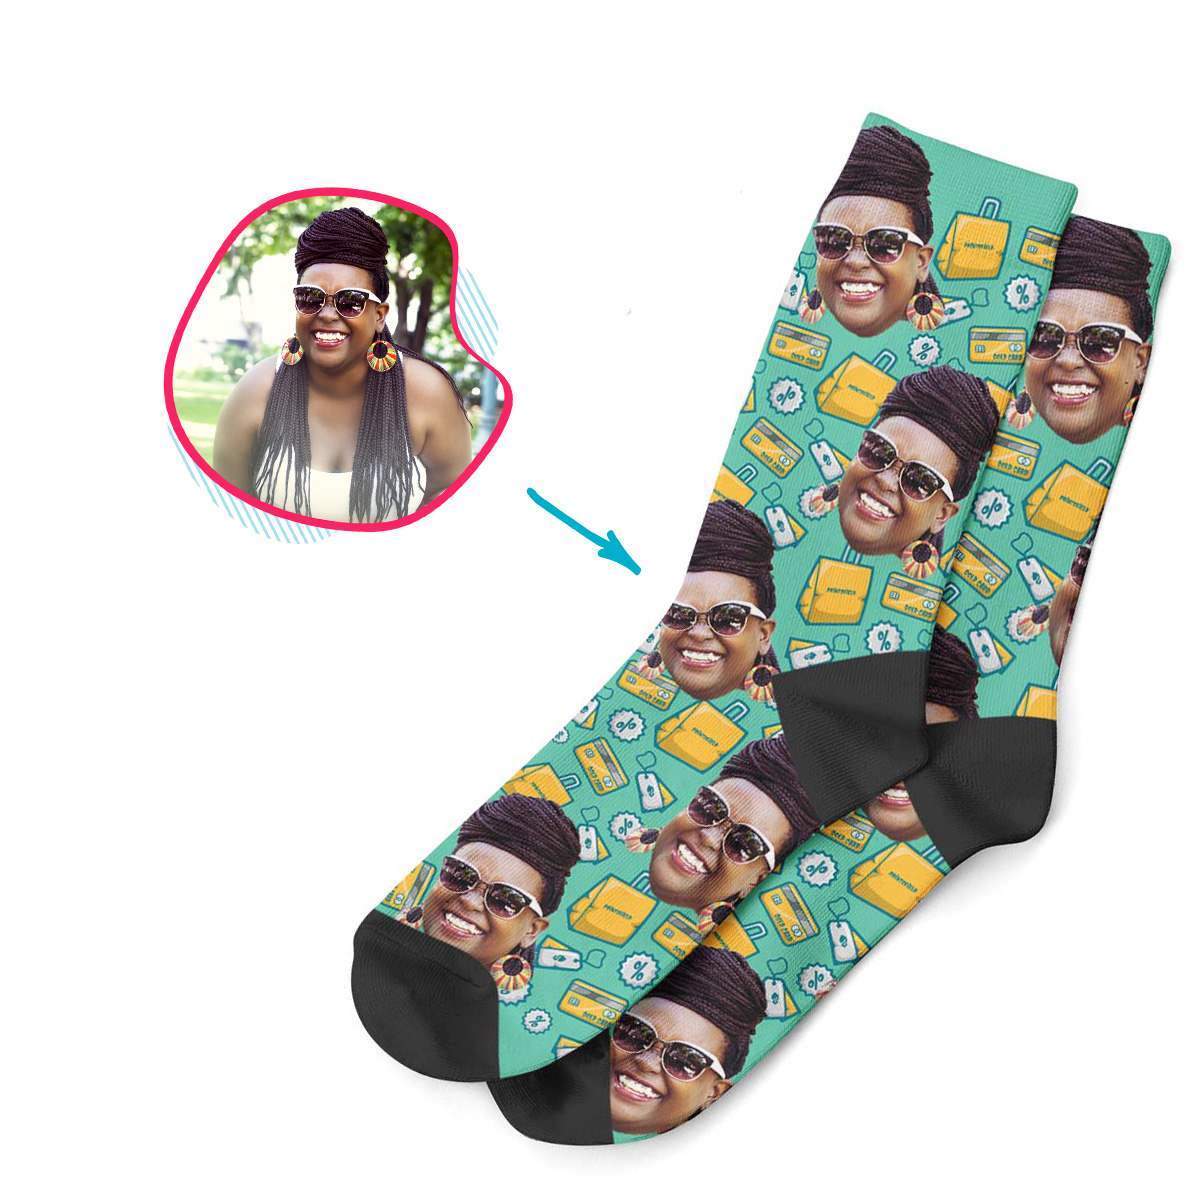 mint Shopping socks personalized with photo of face printed on them